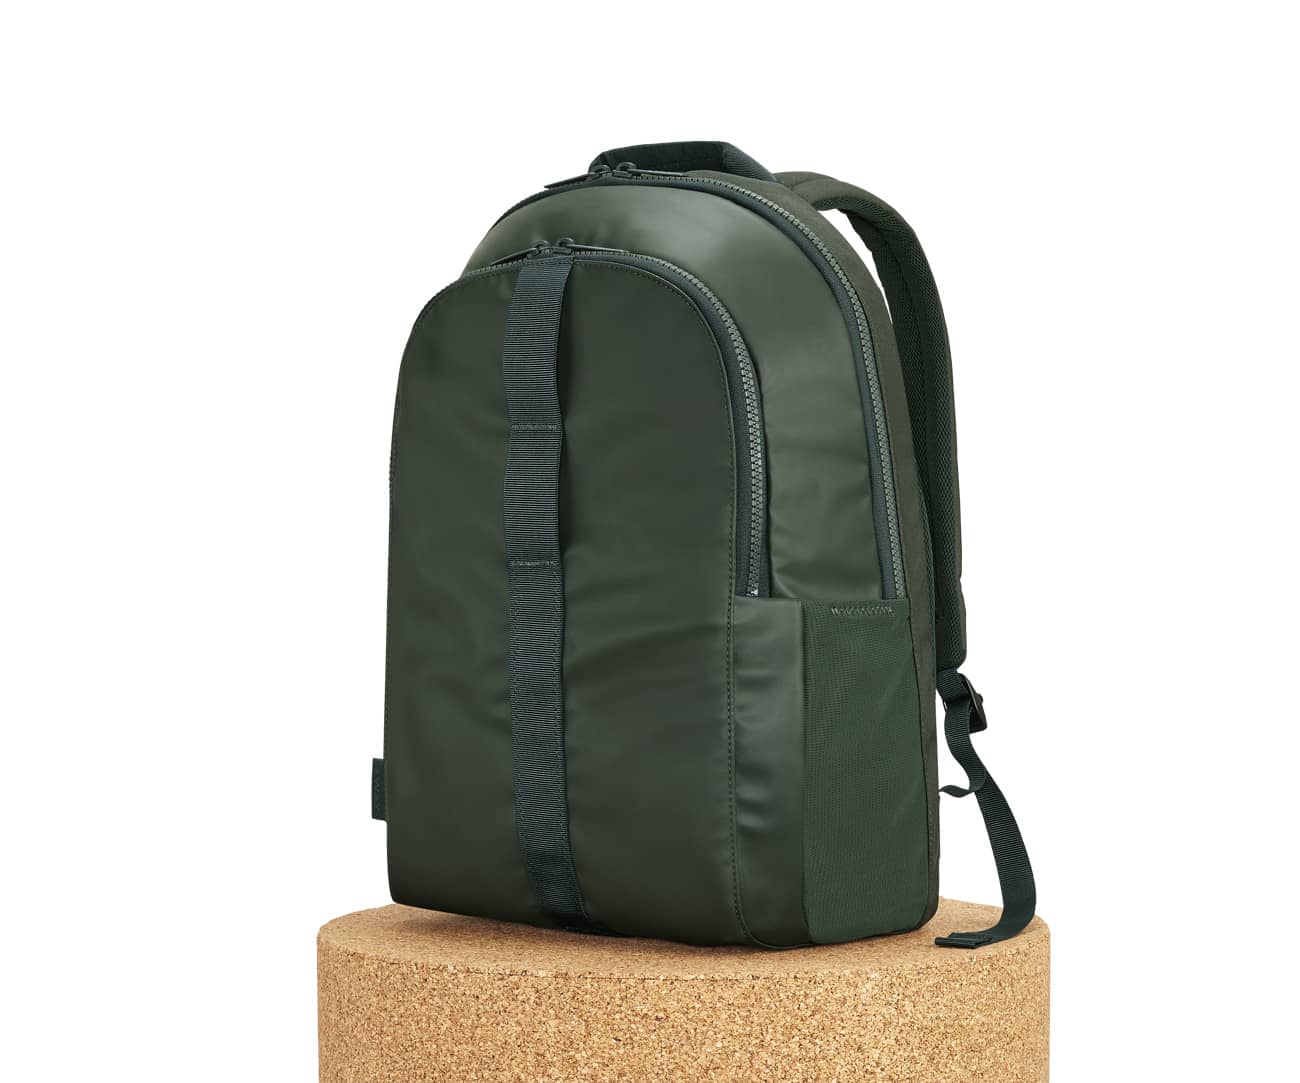 Backpack with two laptop compartments